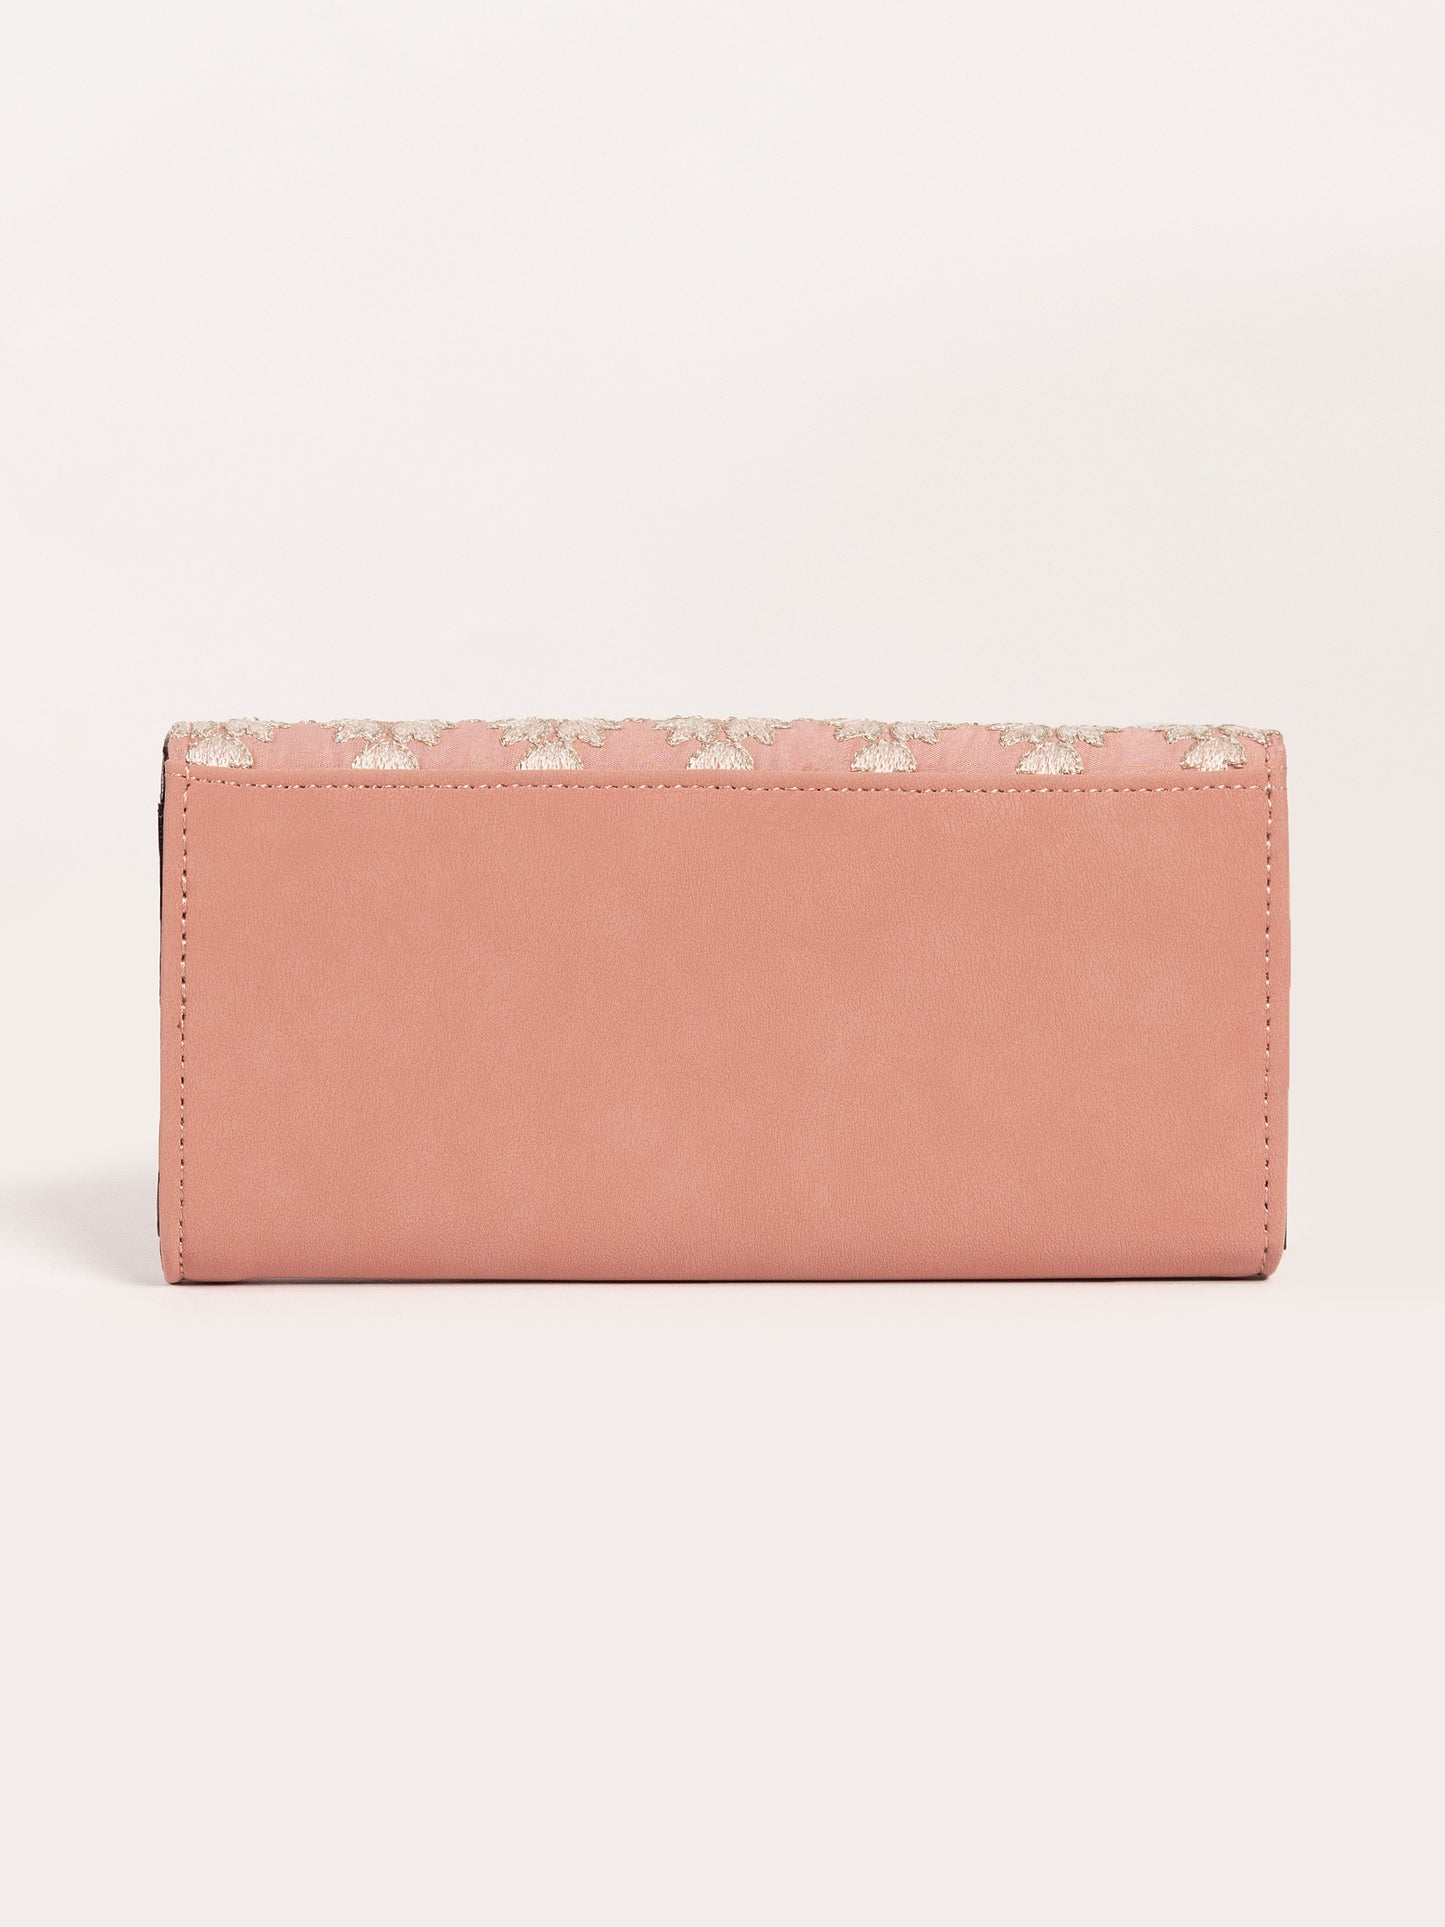 Embroidered Pattern Wallet